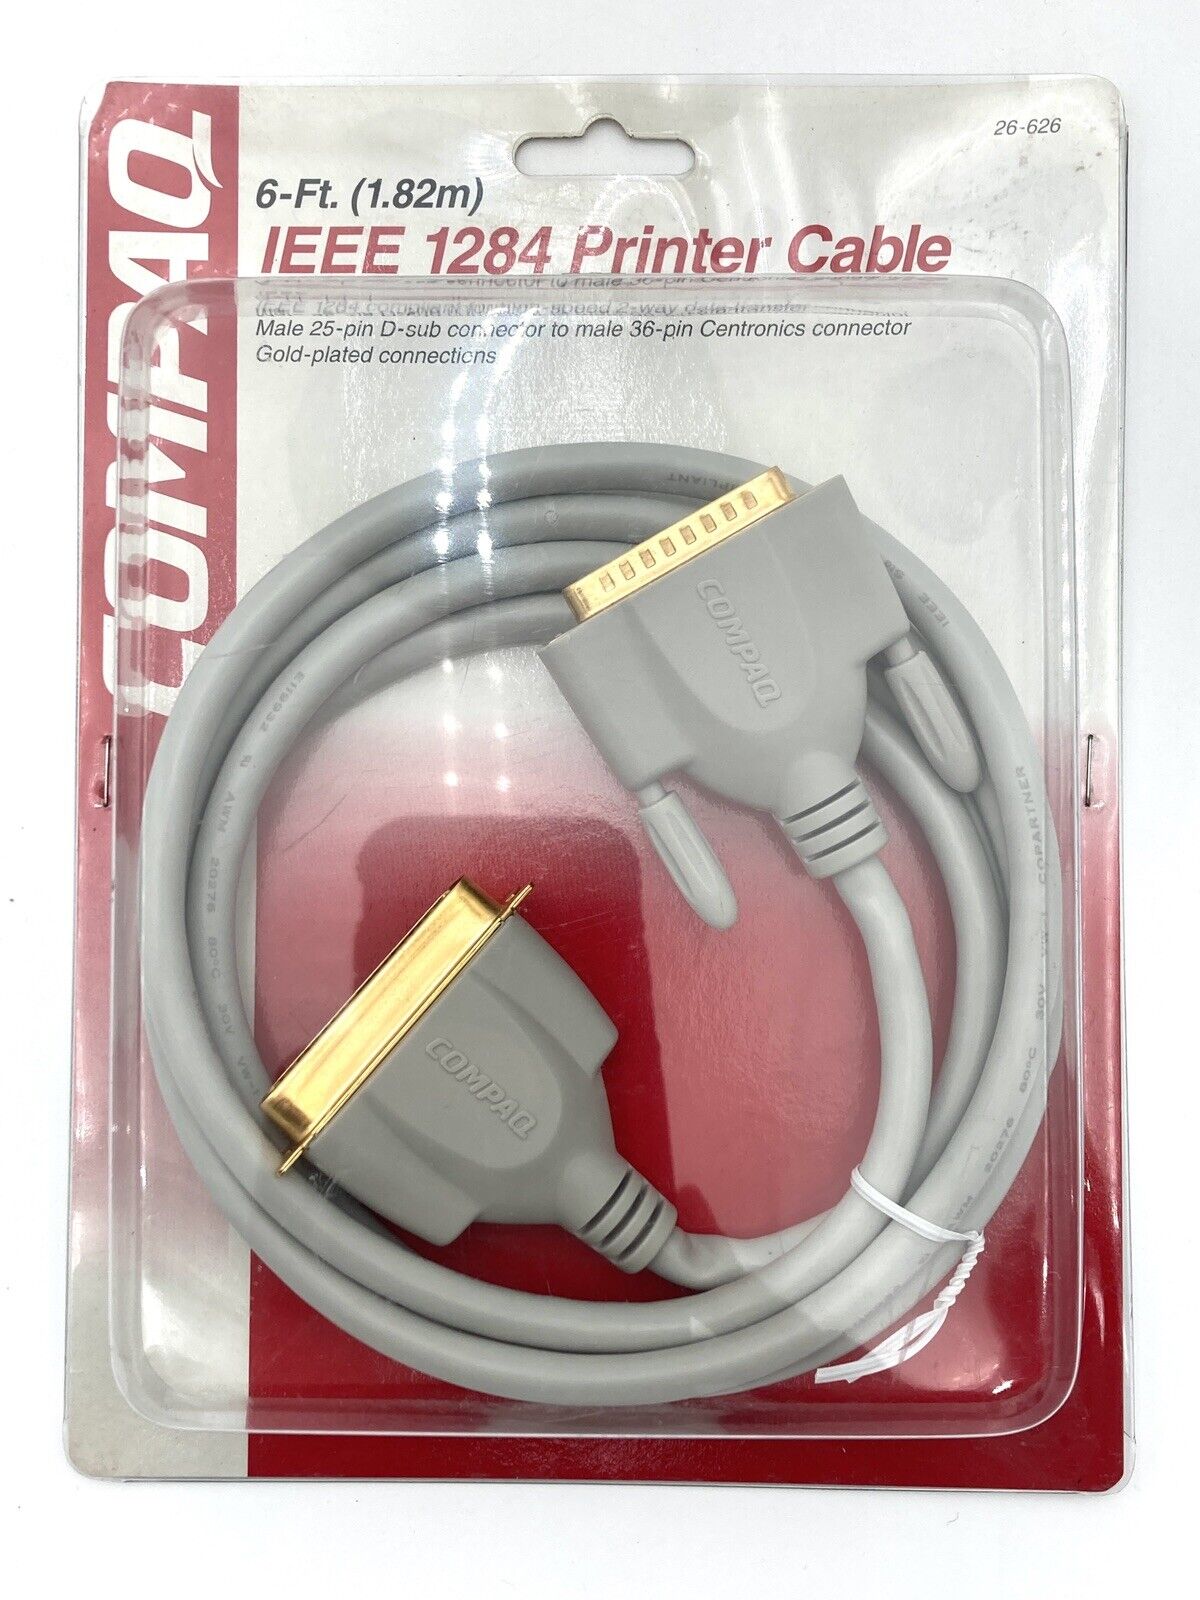 Compaq 26-631 IEEE 1284 Printer cable 6’ Gold Plated  (NEW SEALED) NOS Vtg Tandy